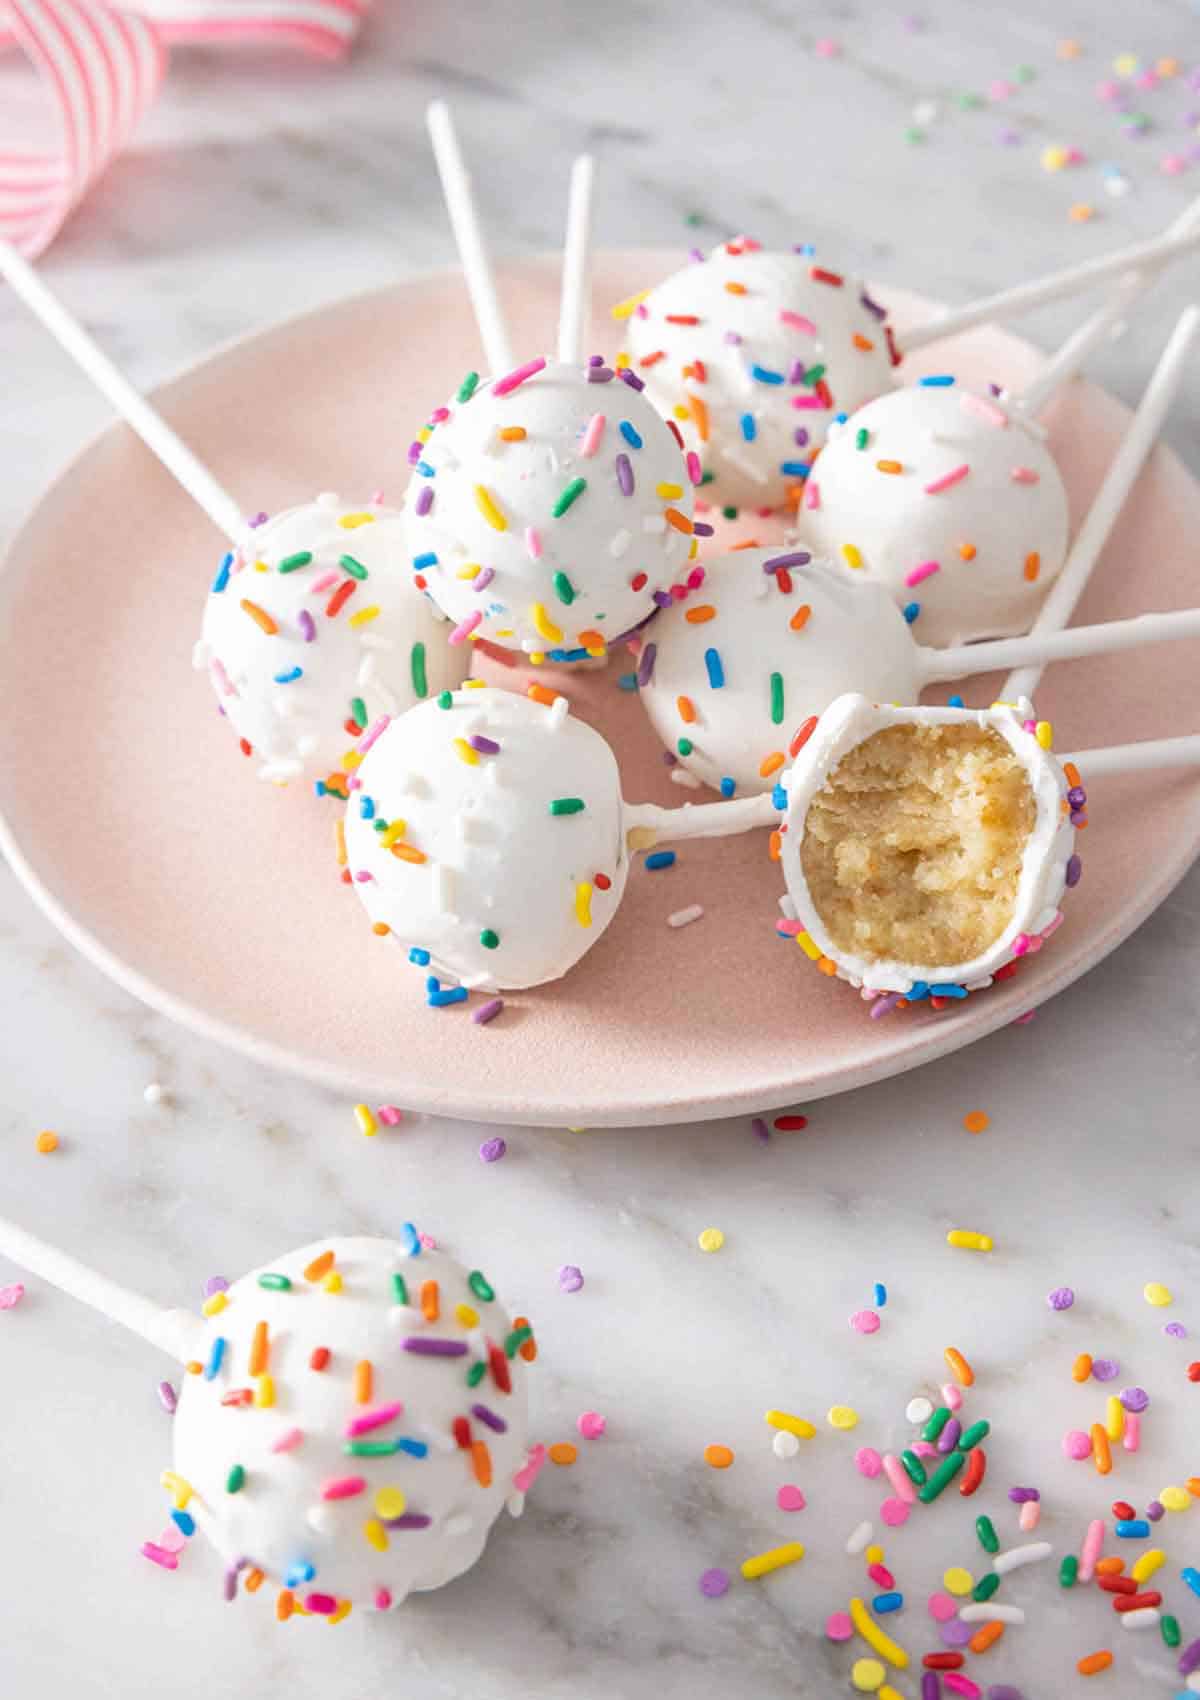 A plate with multiple cake pops on it with one with a bite taken out.